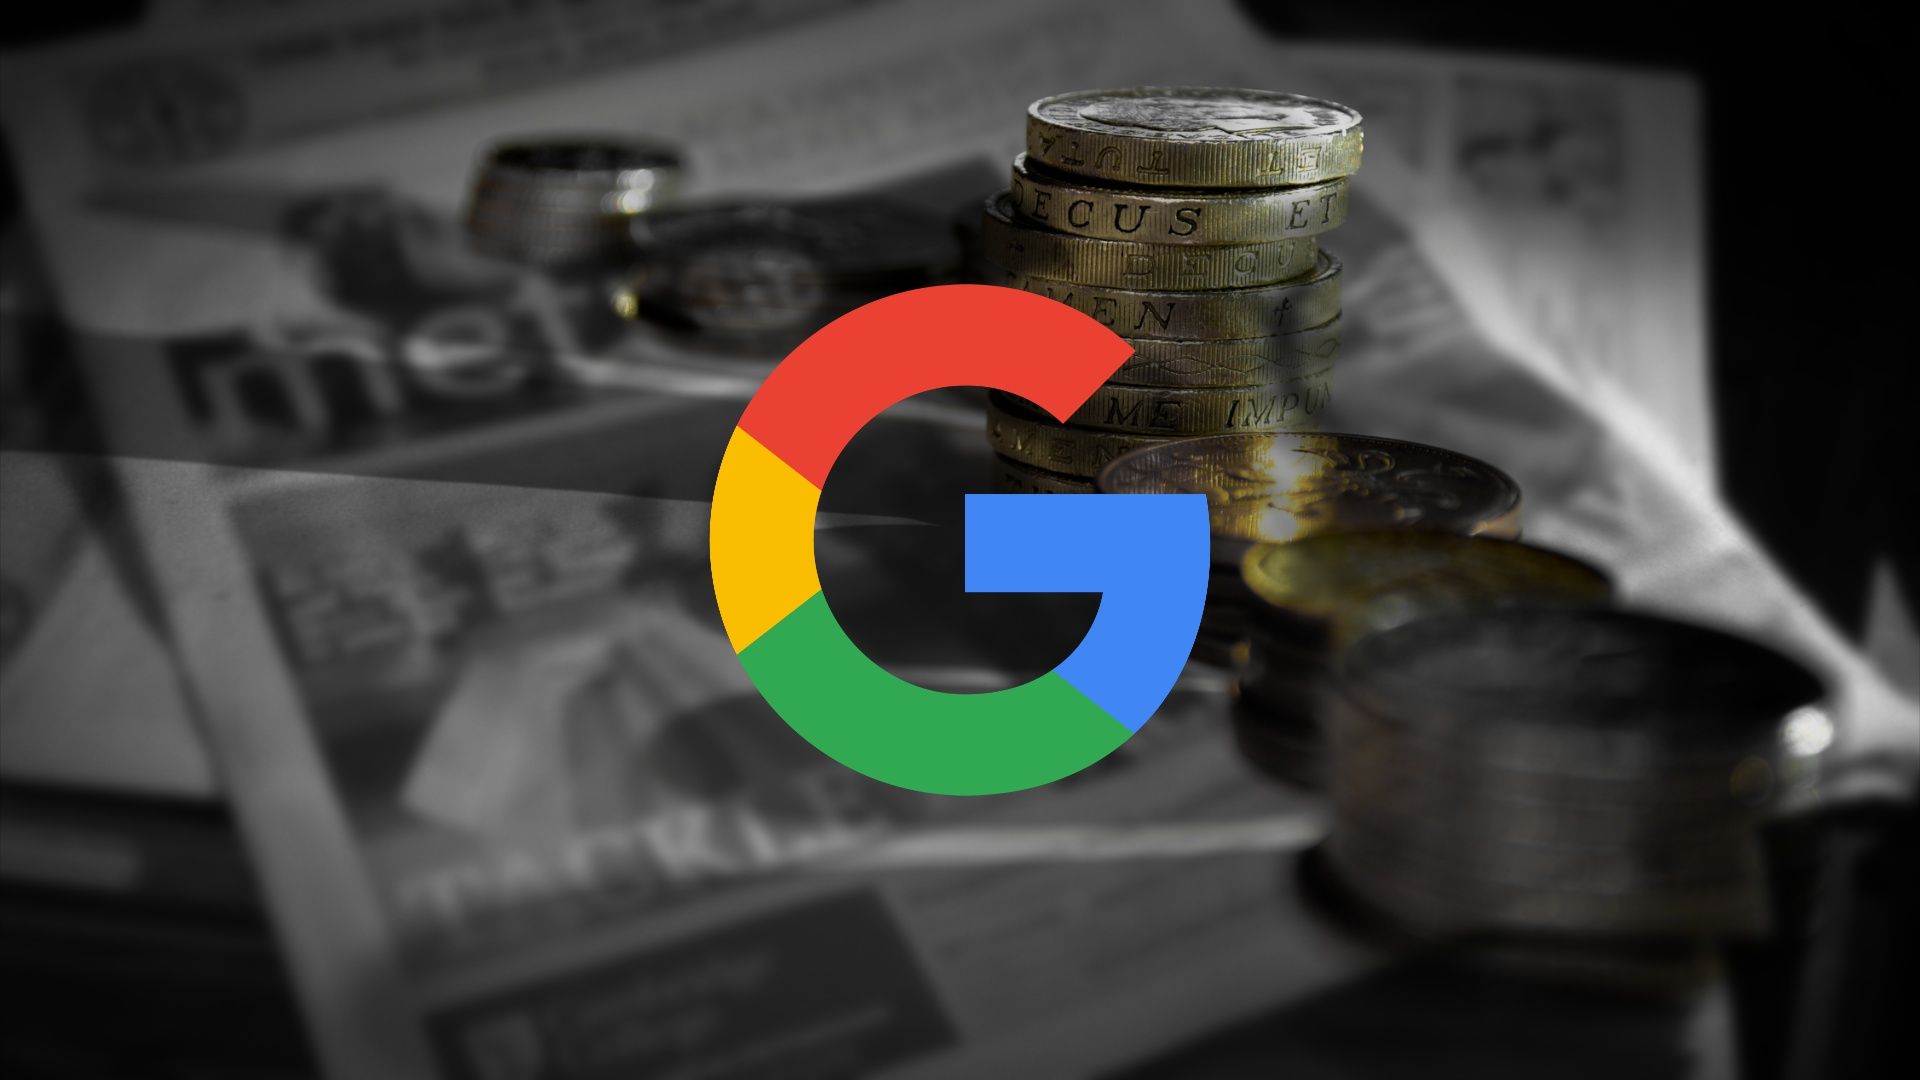 The Google logo overlaid on piles of coins on top of a newspaper